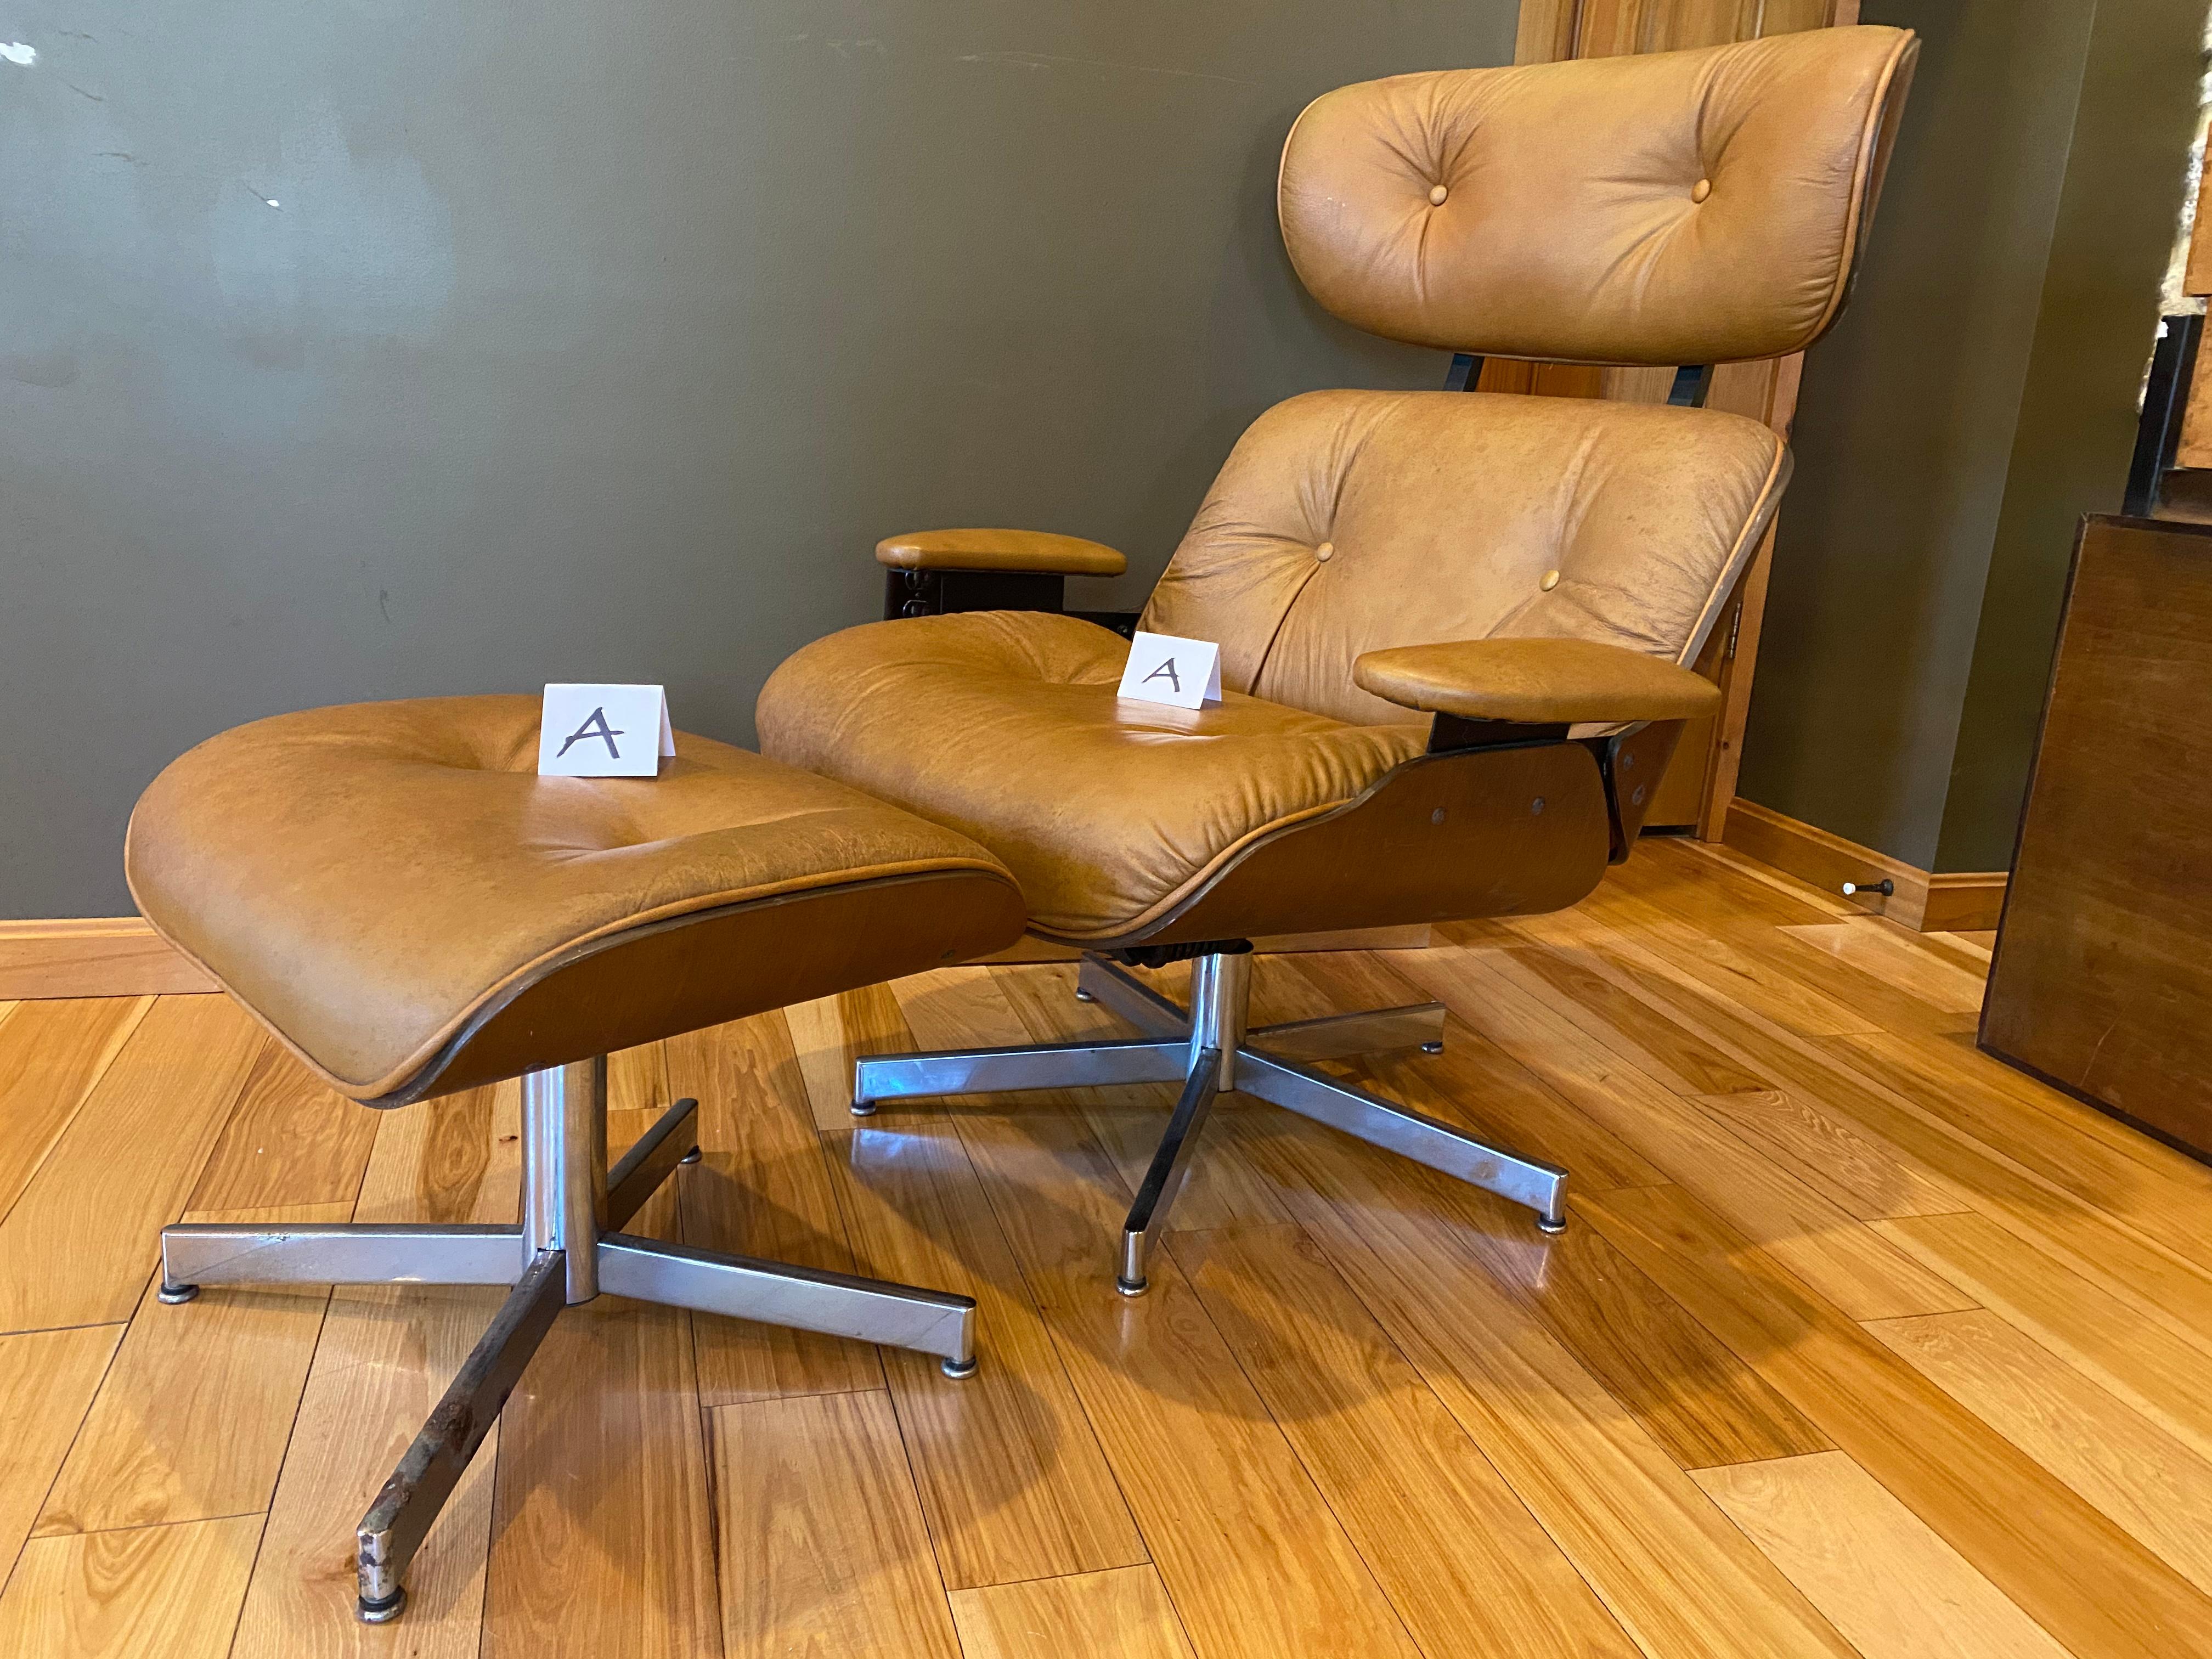 Mid-century leather Eames style lounge chair and ottoman set by Selig.

Light camel-colored leather and molded wood lounge chair and ottoman set by Selig Manufacturing Co. Modeled after the classic Eames lounge chair (Herman Miller), the Selig chair